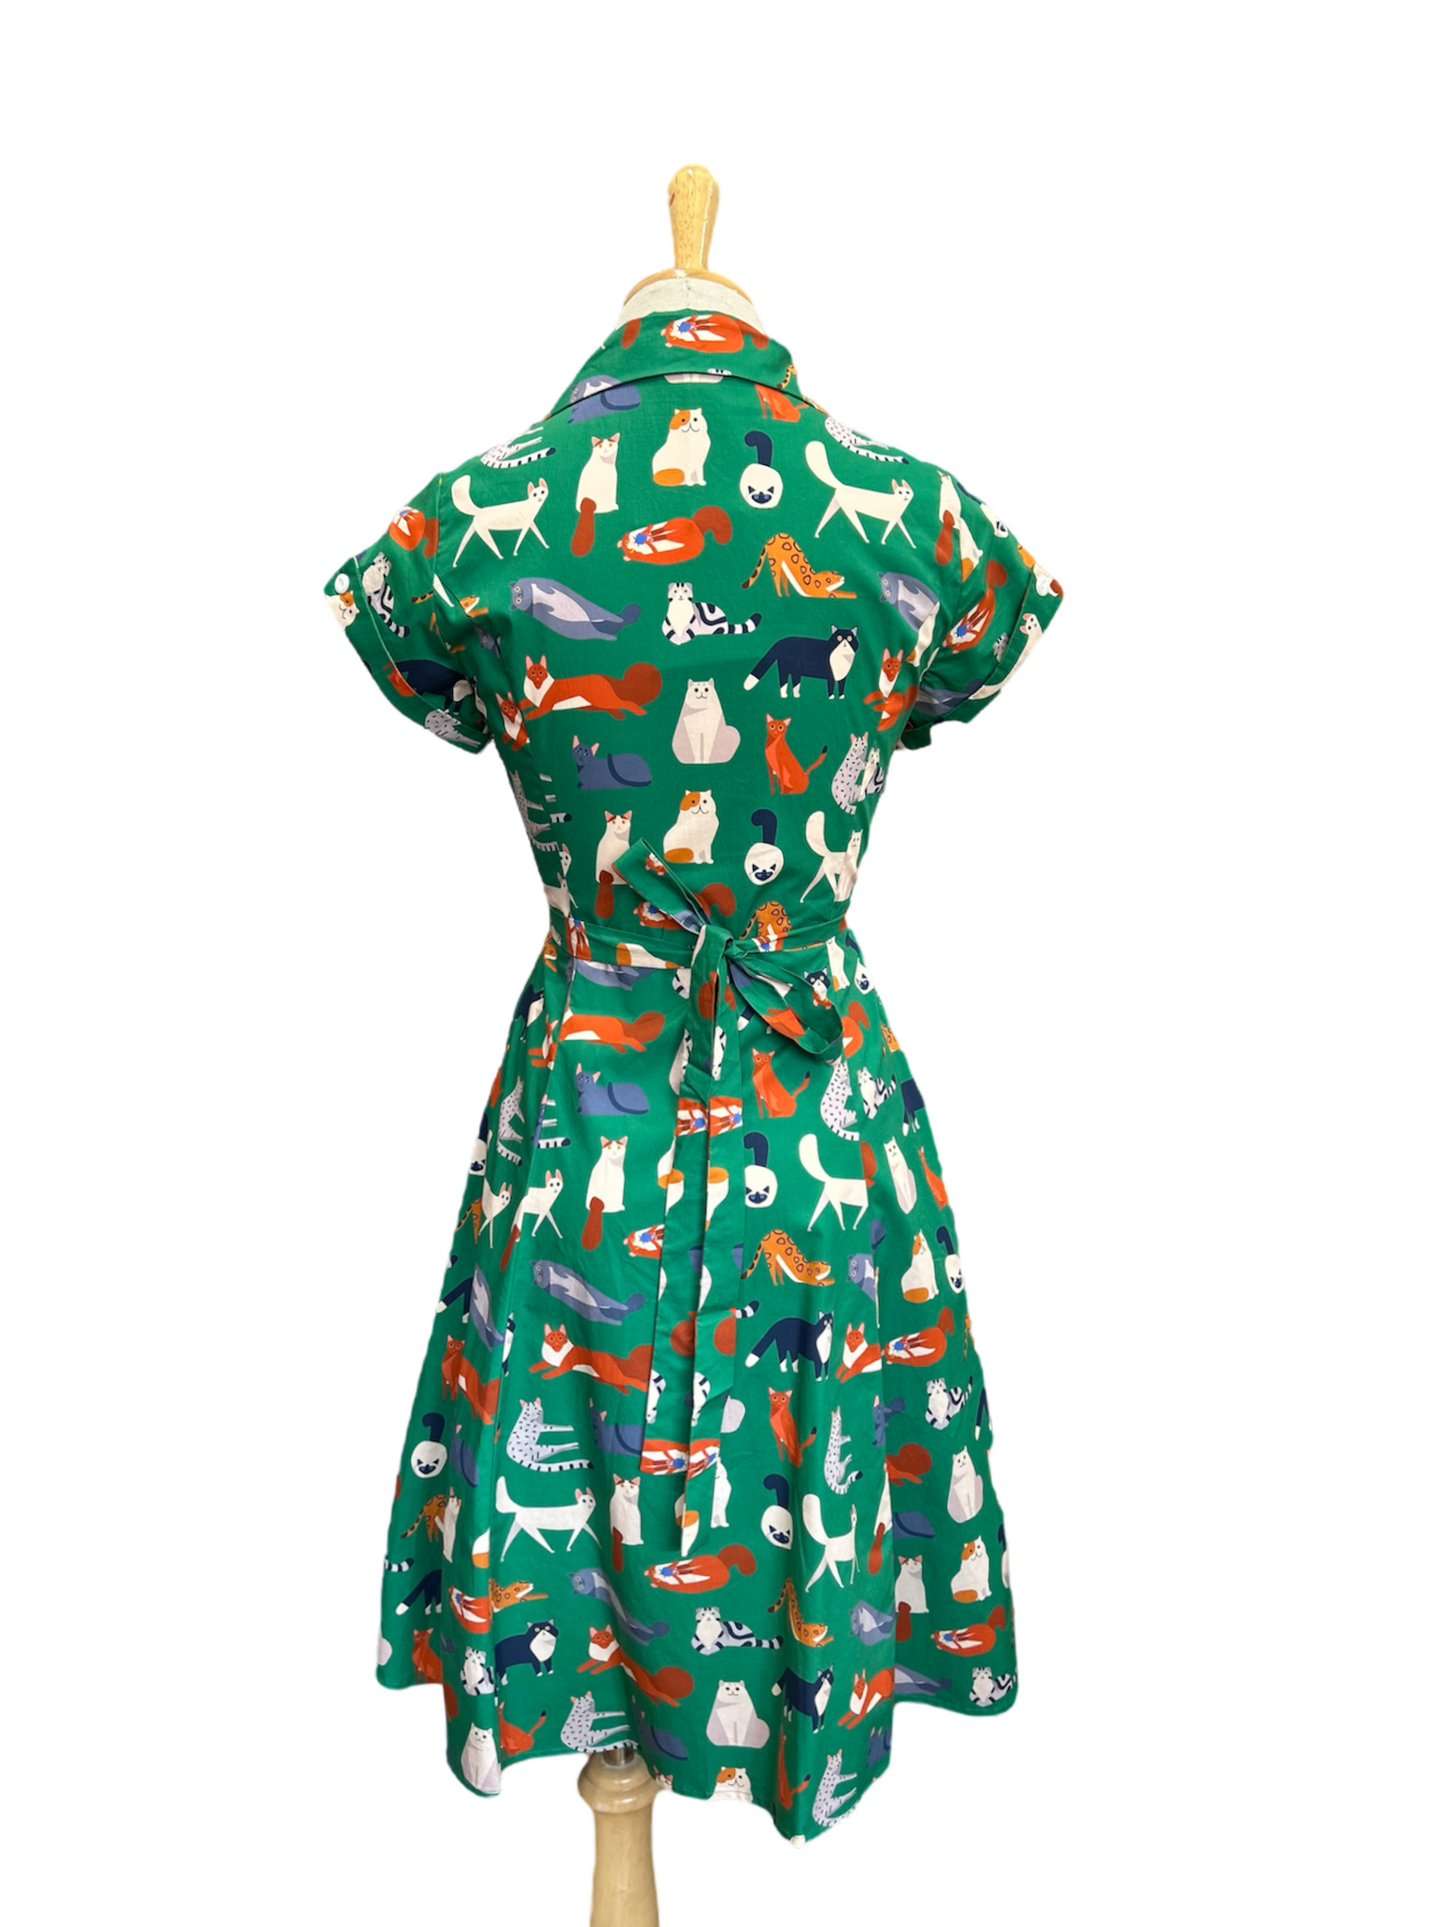 Sweet Temptation Dress - Cats world ( size 6 only)